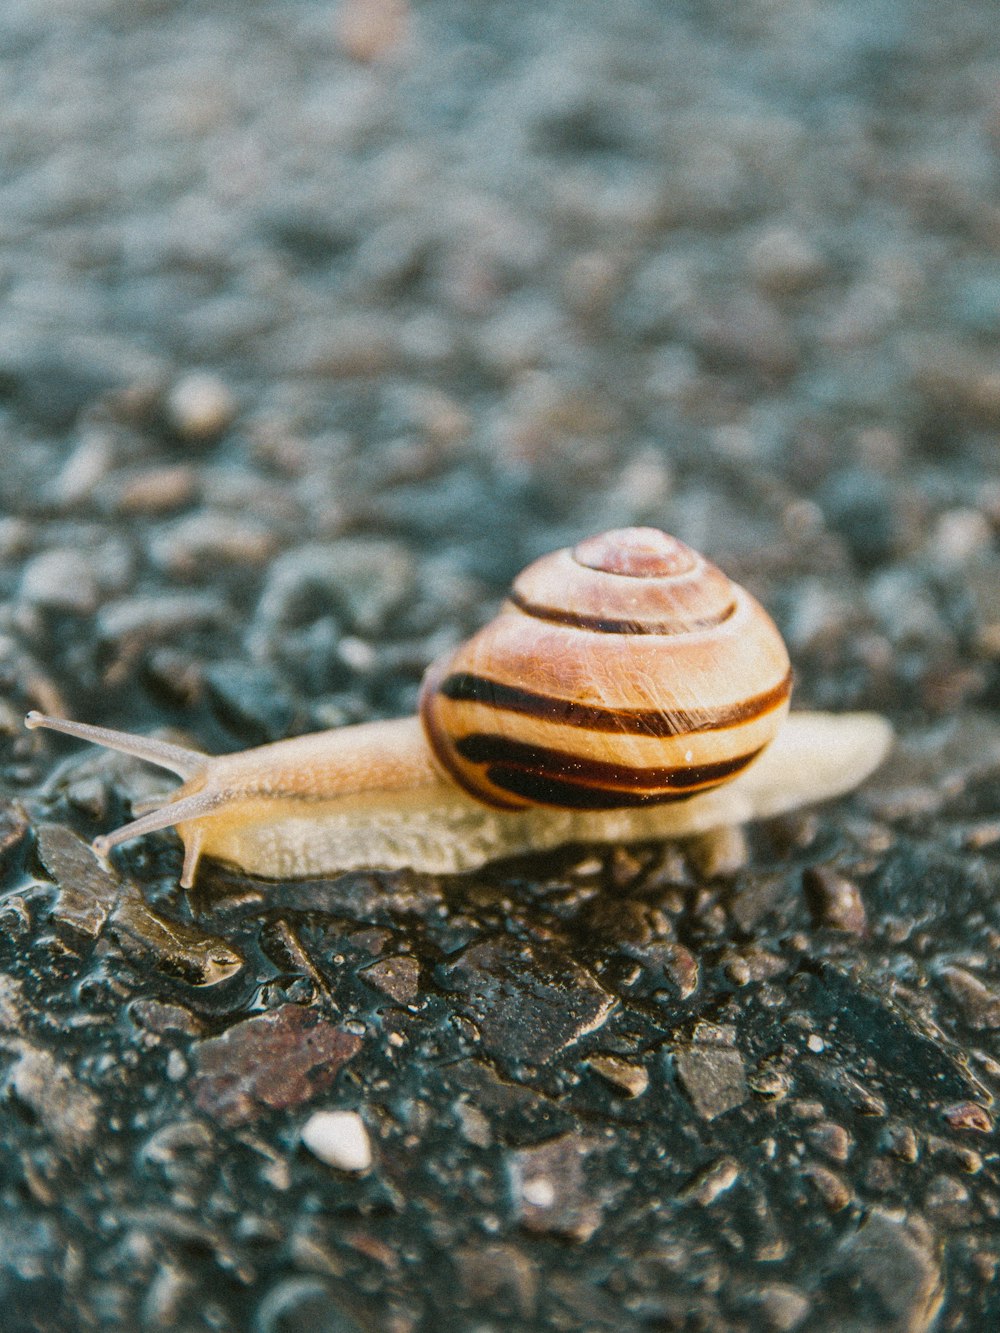 brown and white snail on ground